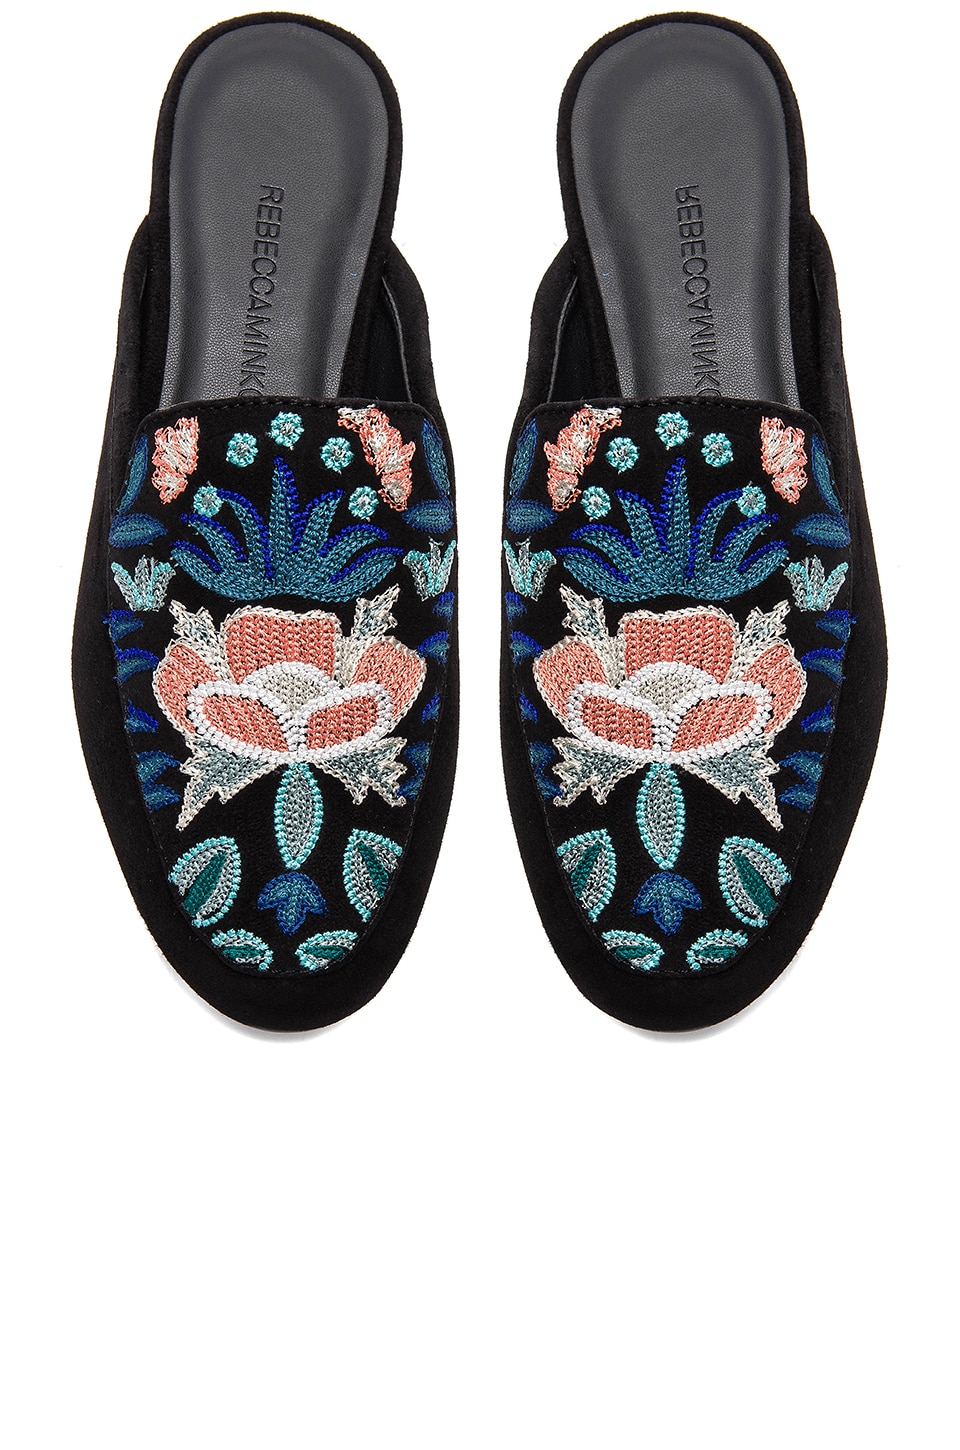 REBECCA MINKOFF Raylee Floral Loafer Mule in Floral Embroidery/Black ...